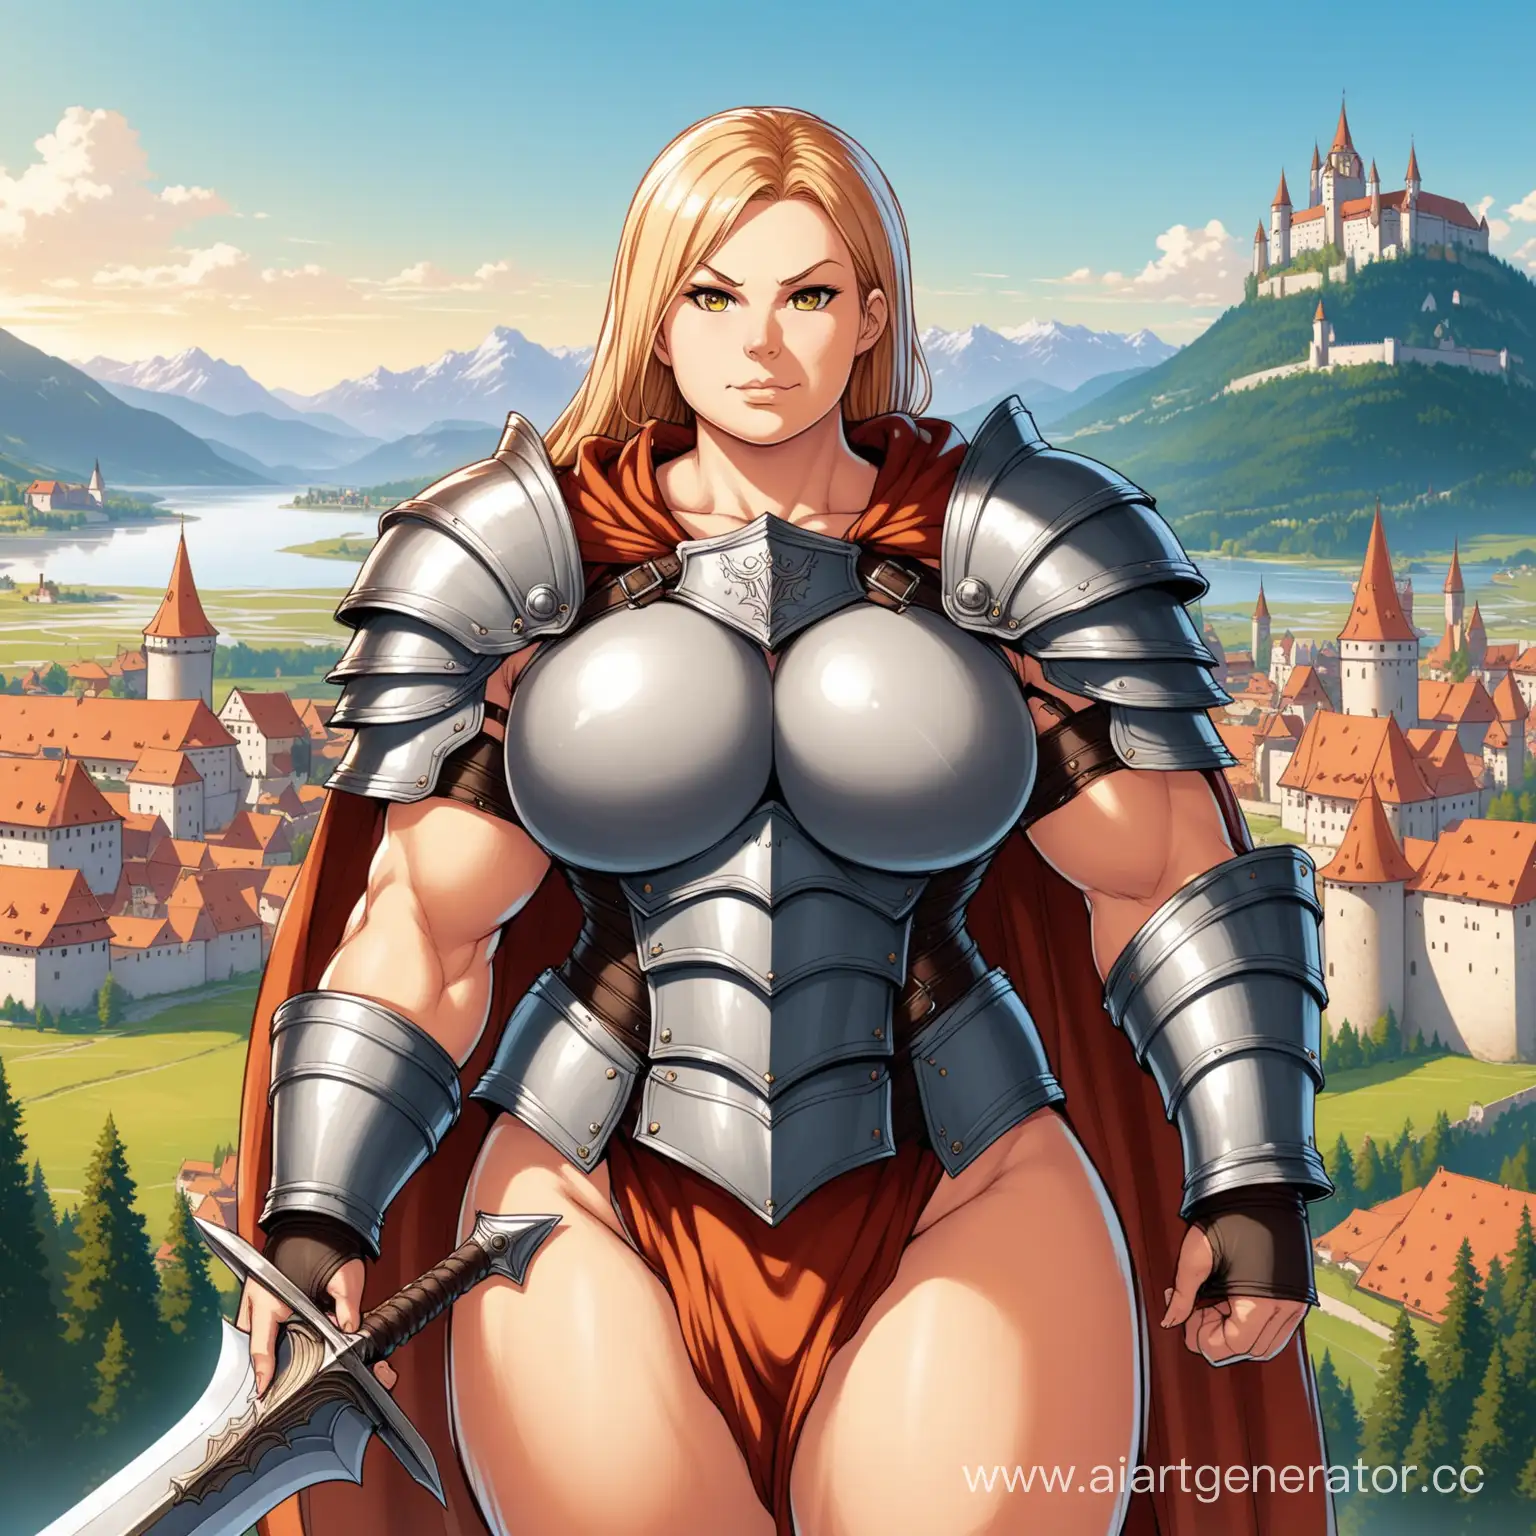 Big woman with a claymore, very muscular, holding a claymore on her shoulder, trip of babric horizontally over her chest (the only thing on her chest), shoulder armor, Mondstadt background
+